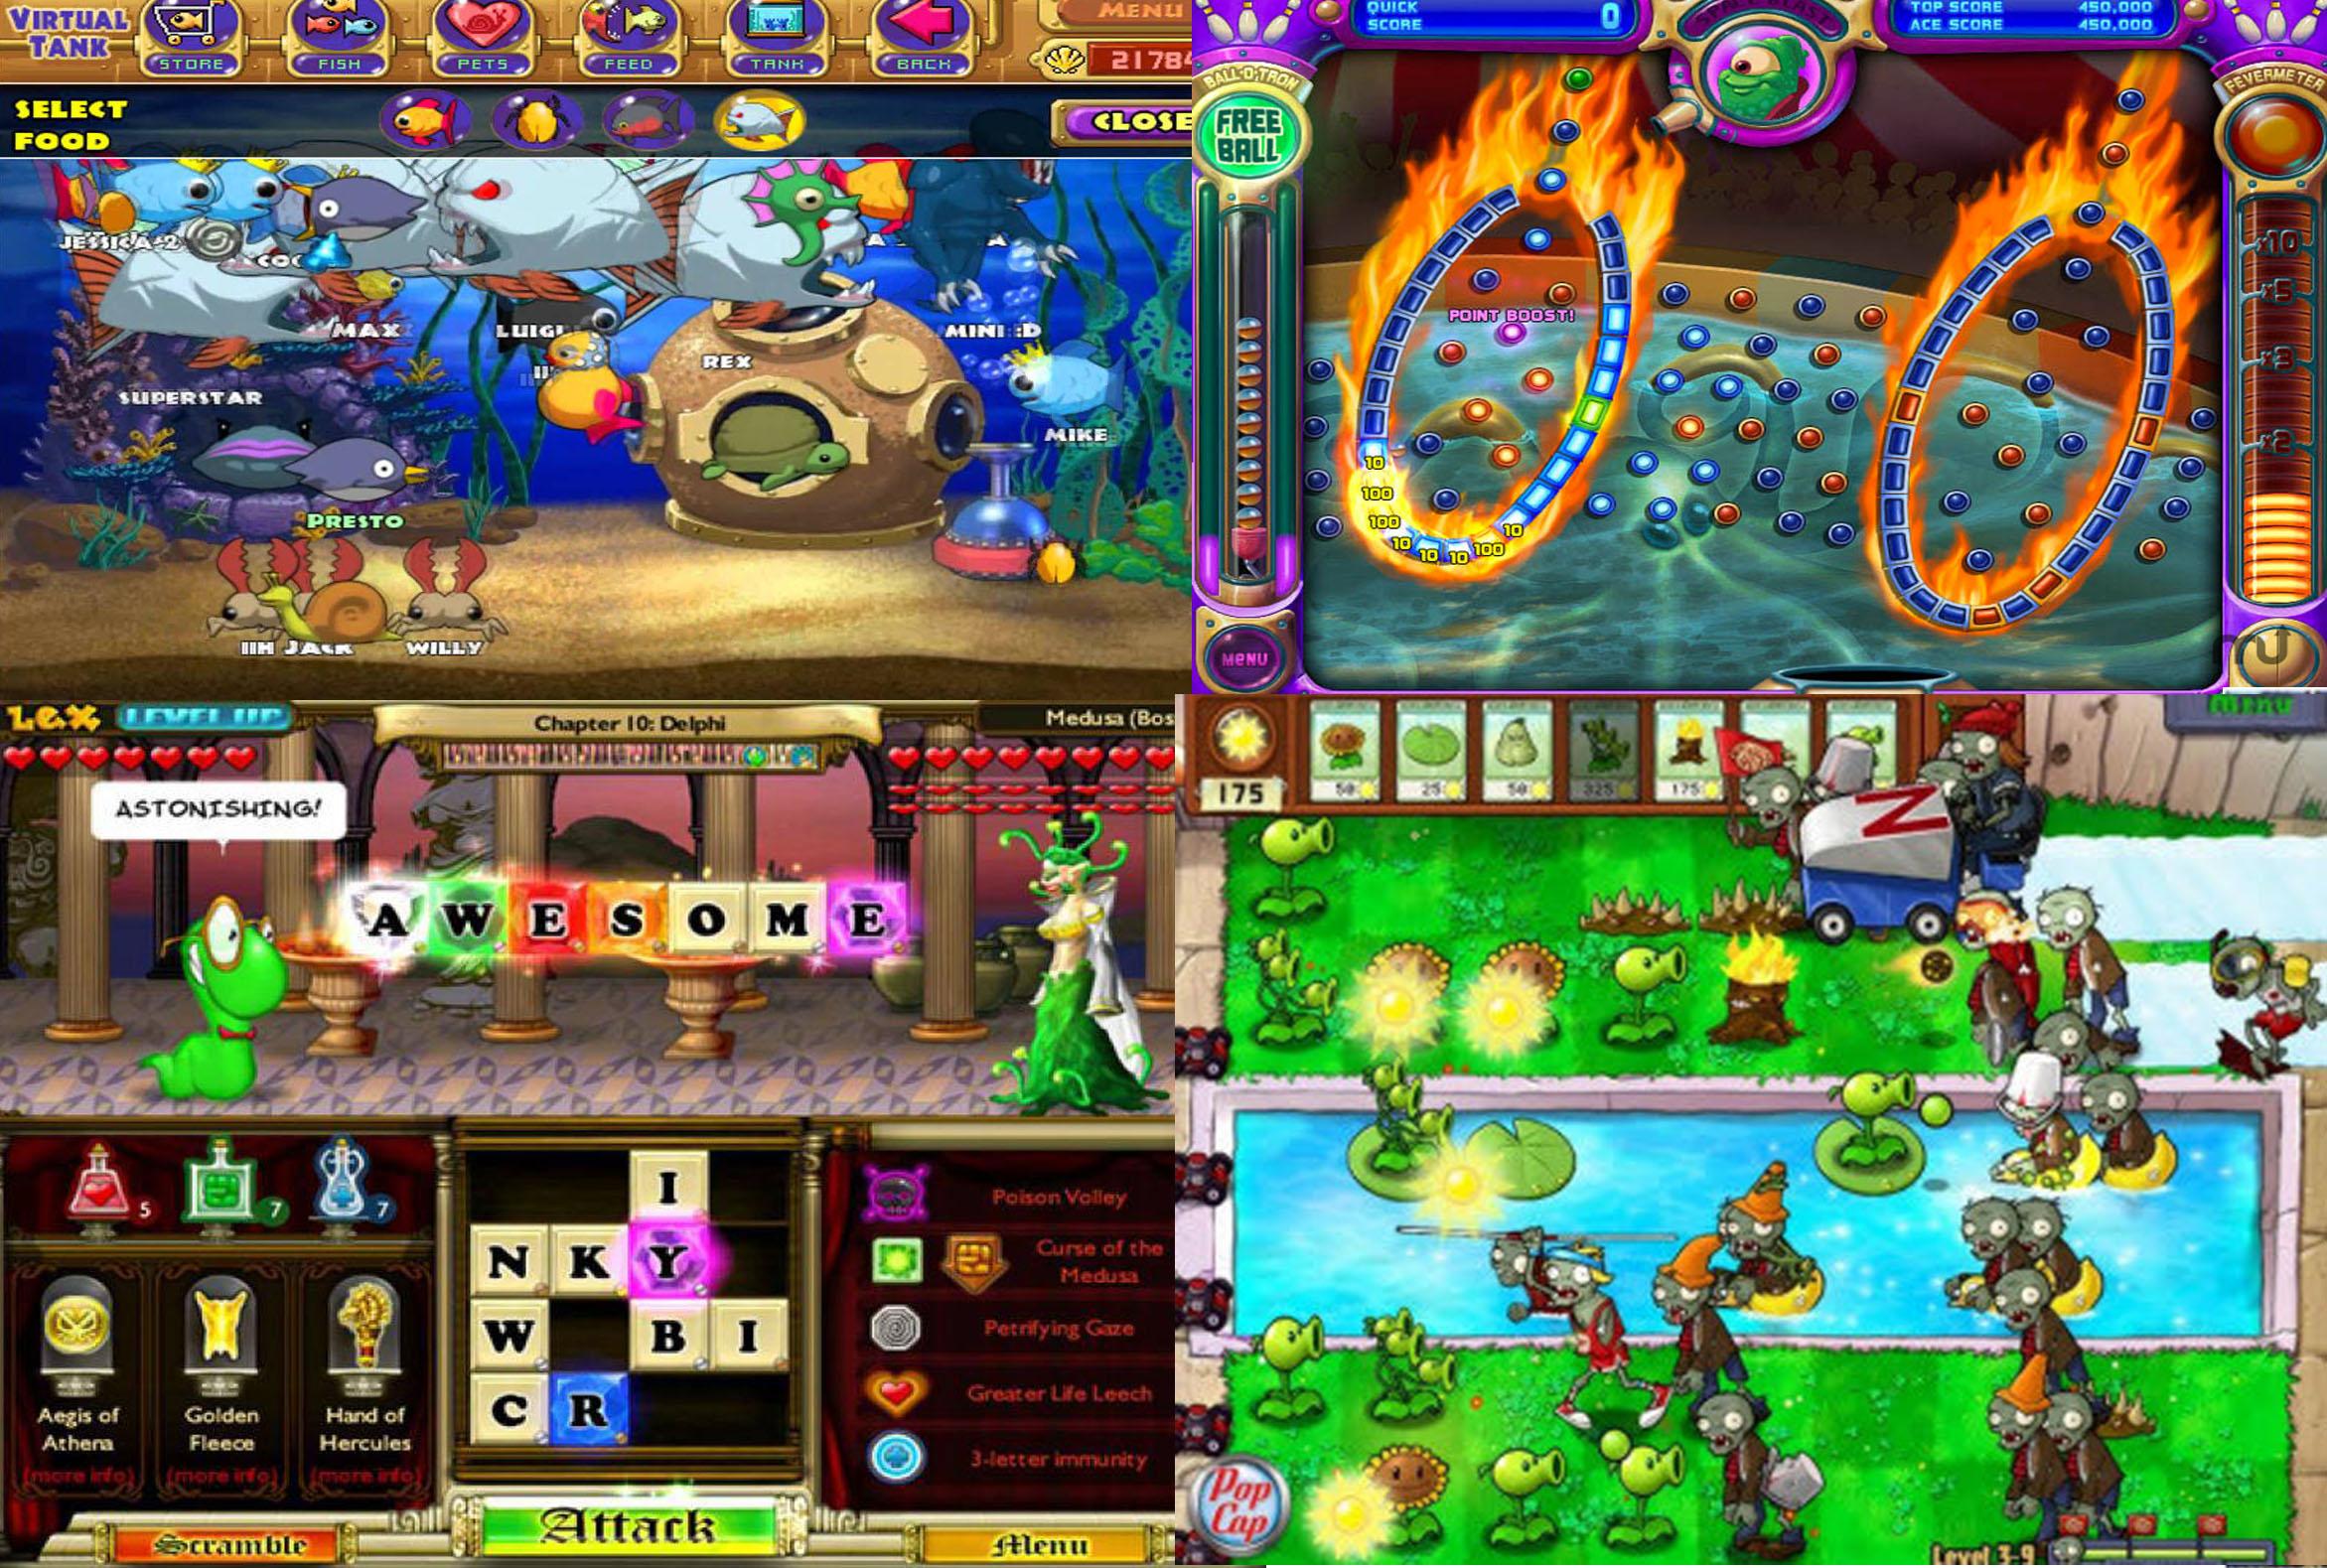 popcap games for pc